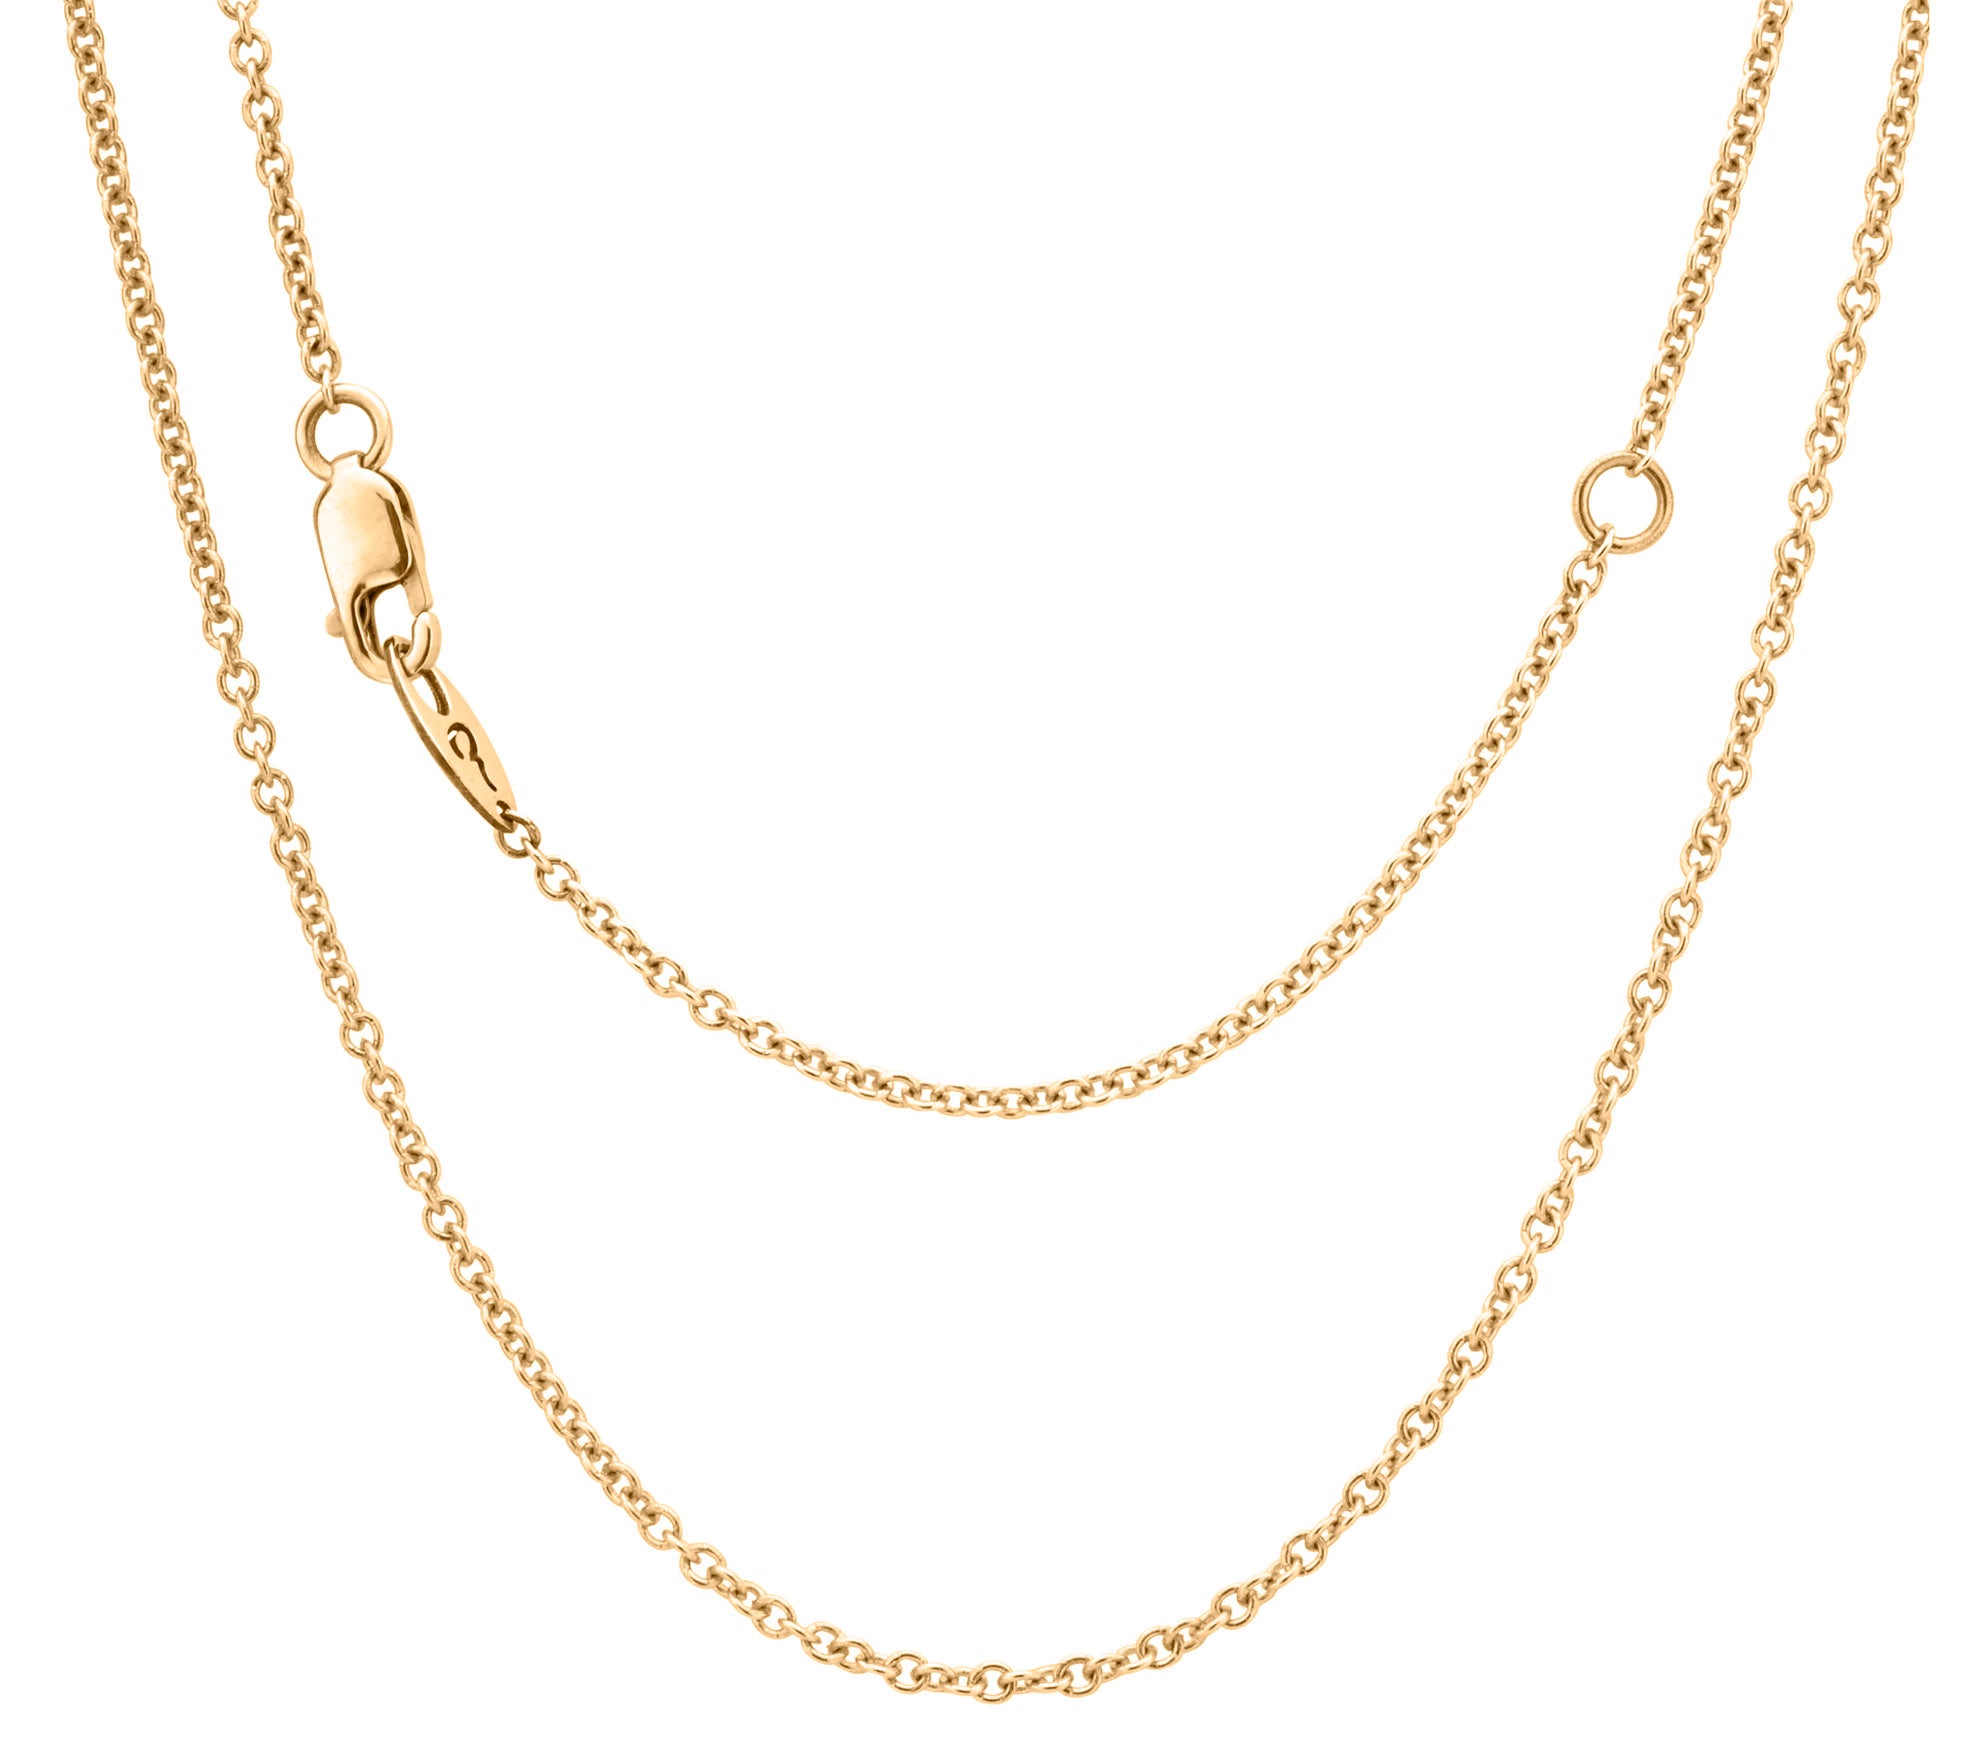 A.JAFFE  16" YELLOW GOLD CHAIN WITH 2" EXTENDER